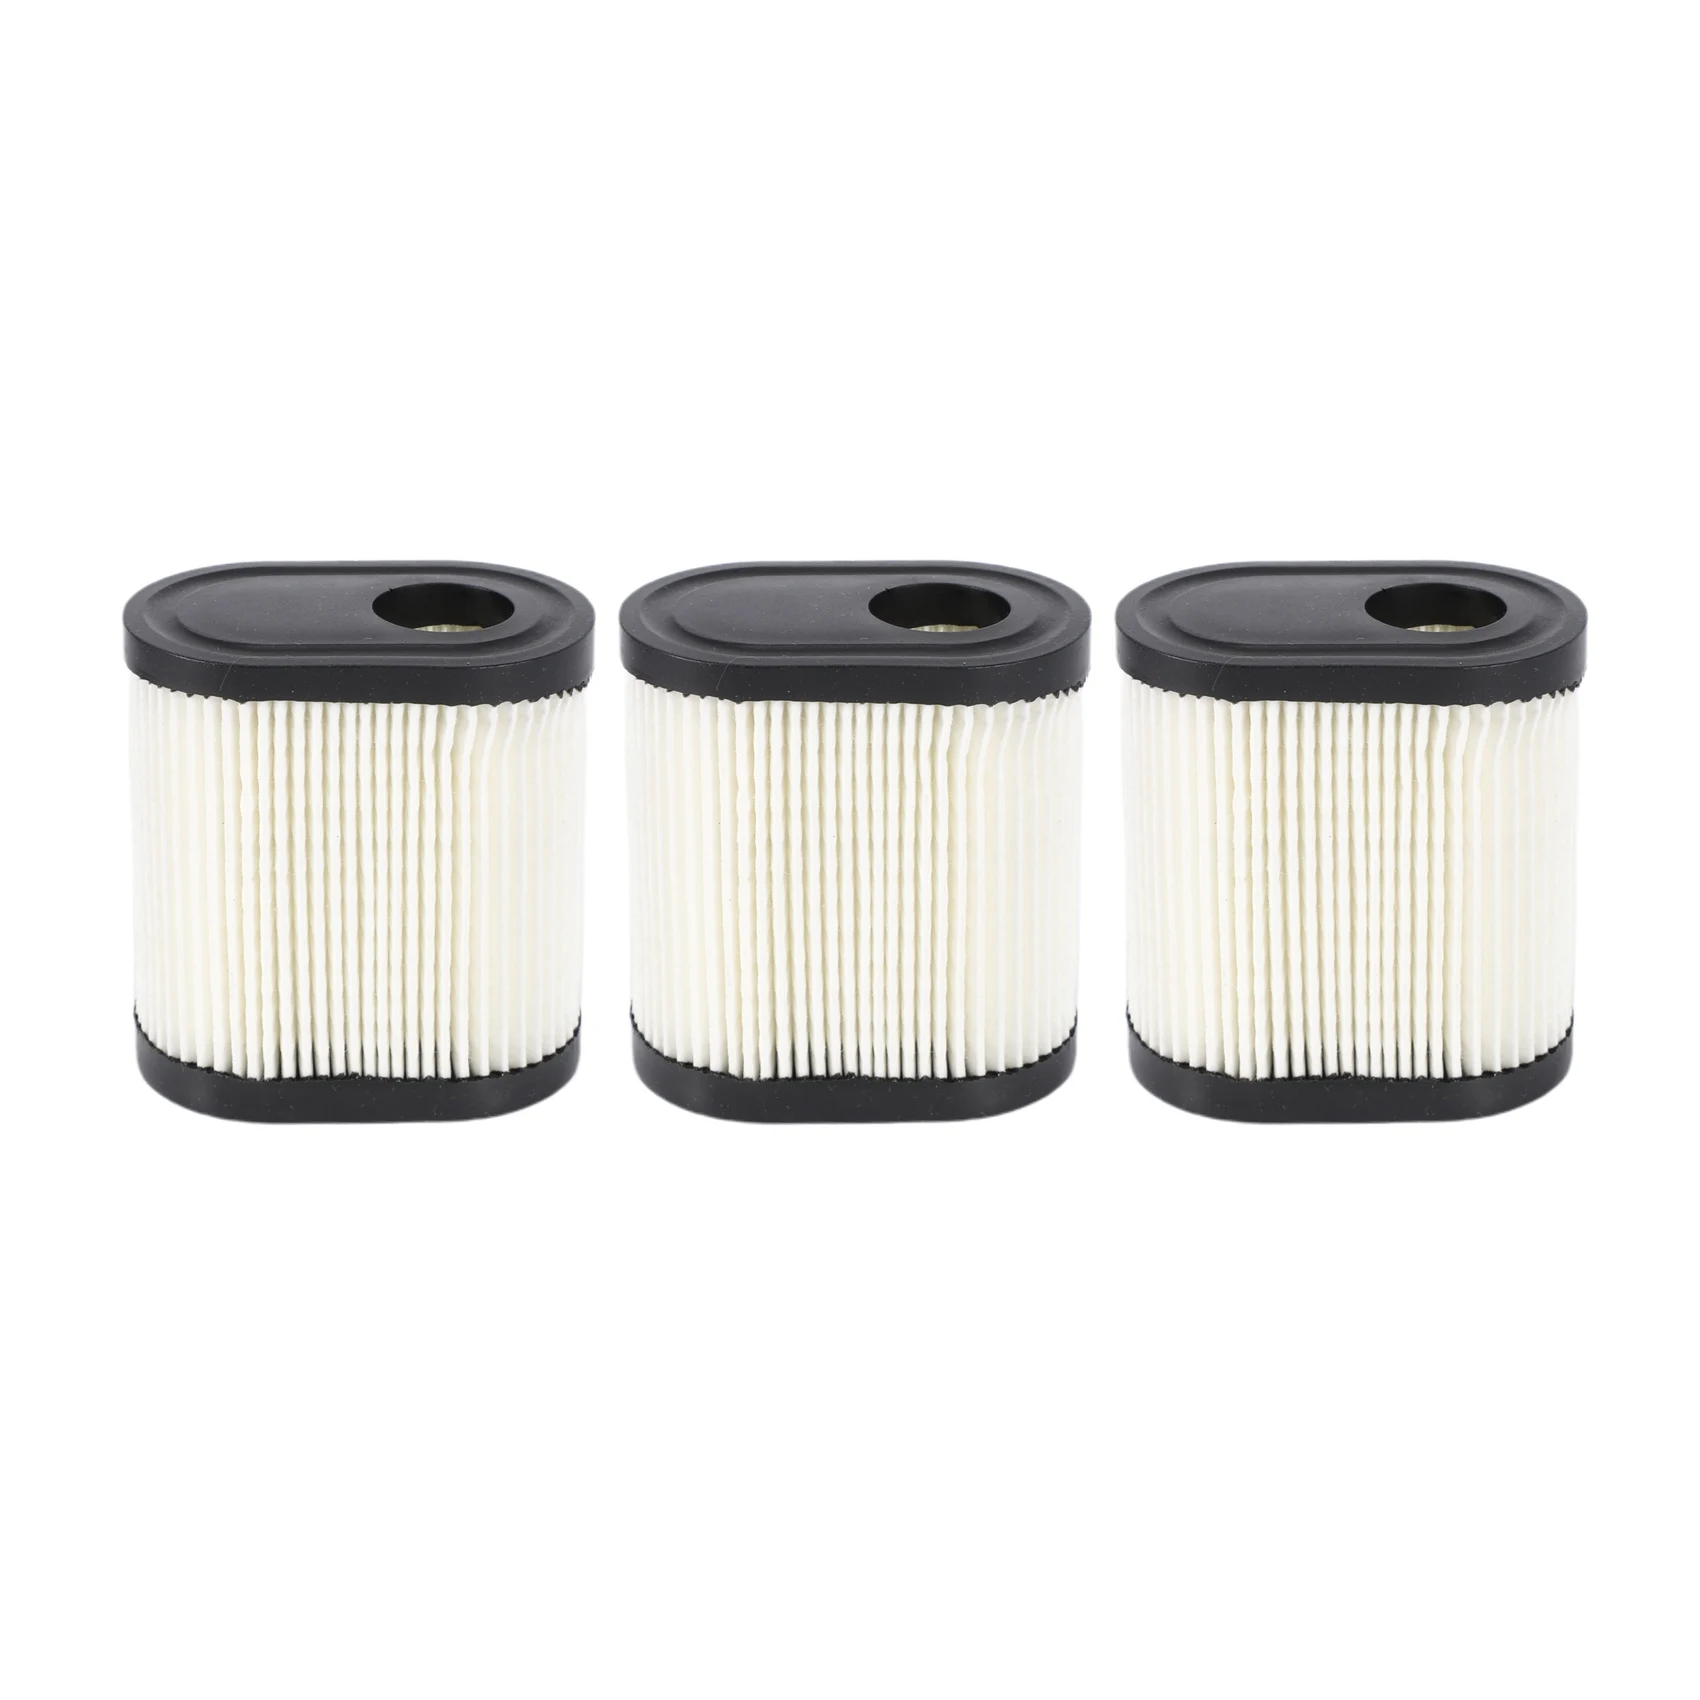 

Air Filter Replacement for Tecumseh 36905 740083A LEV100 LEV115 LEV120 LV195EA OVRM6N Lawn Mower Air Cleaner-3Pcs